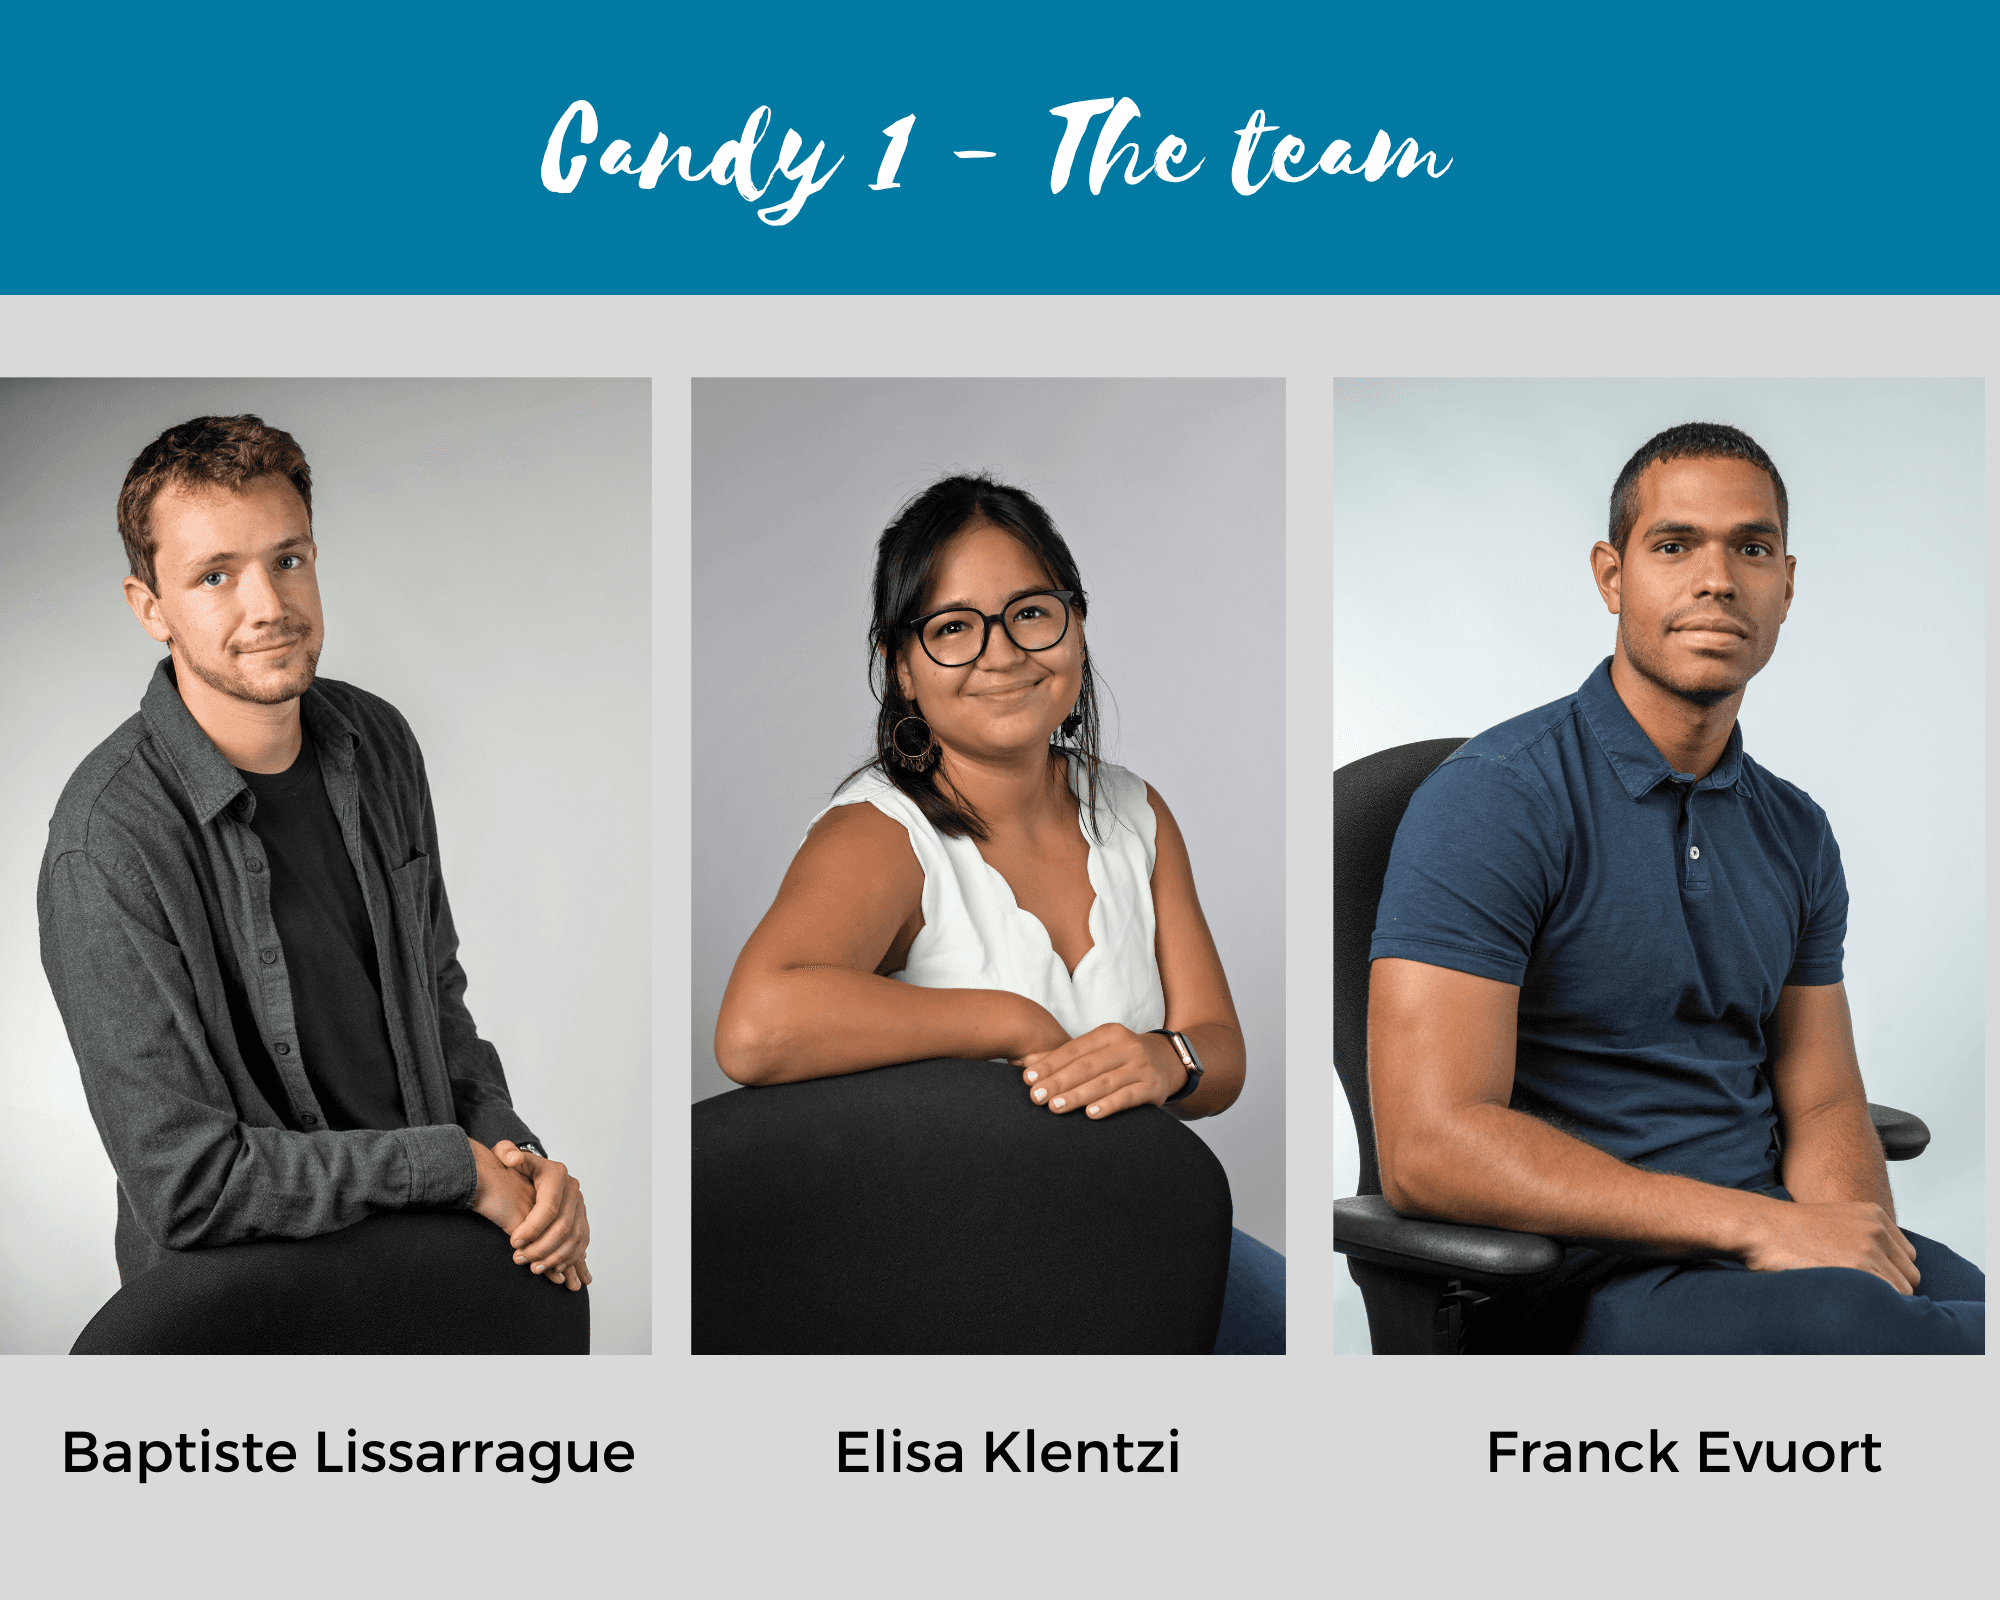 Candy 1 - The team